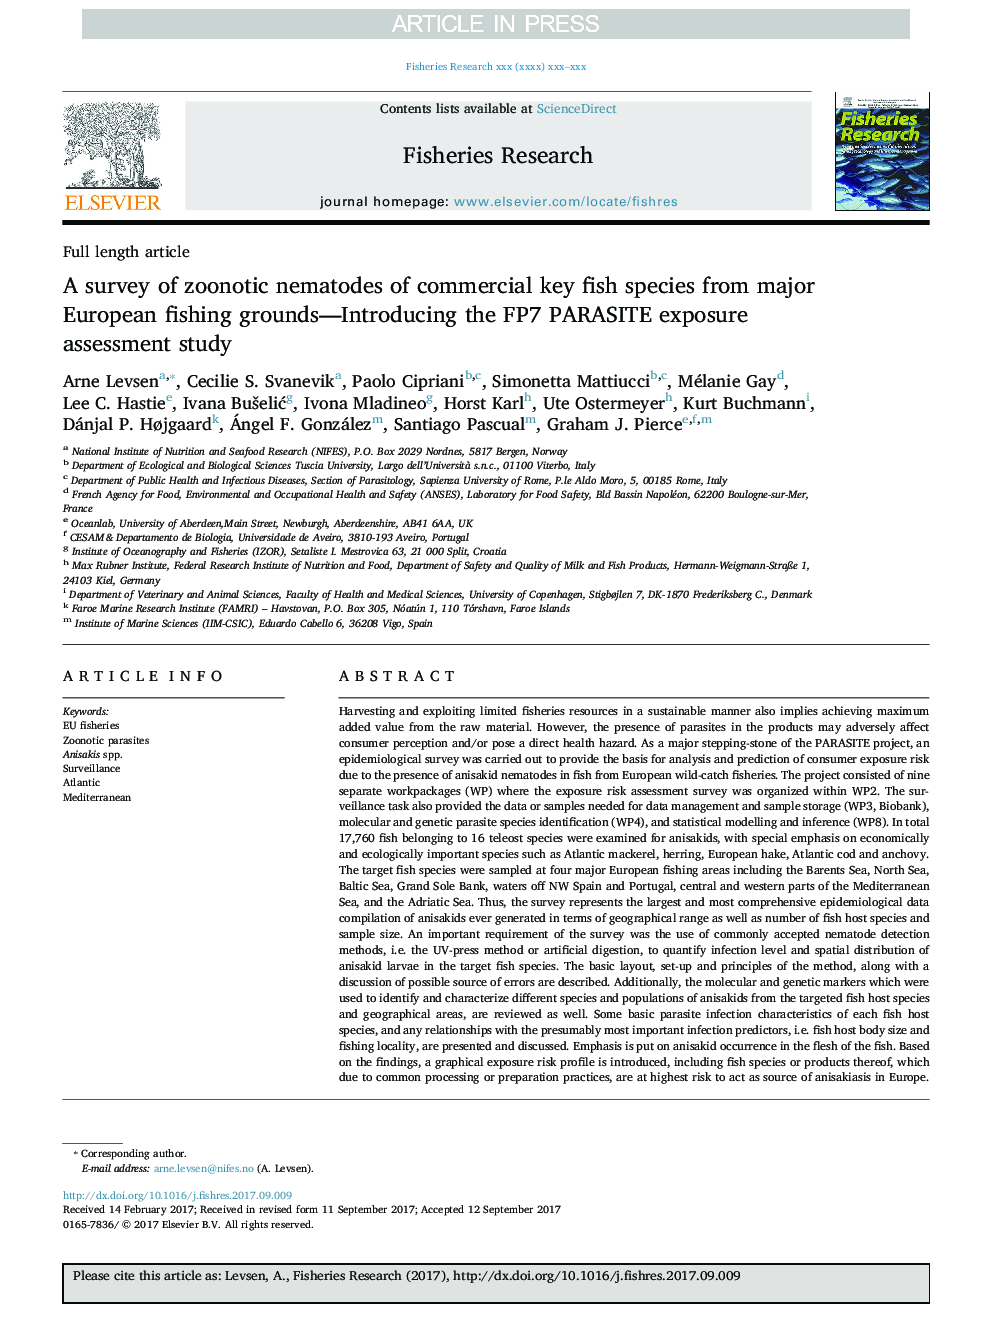 A survey of zoonotic nematodes of commercial key fish species from major European fishing grounds-Introducing the FP7 PARASITE exposure assessment study